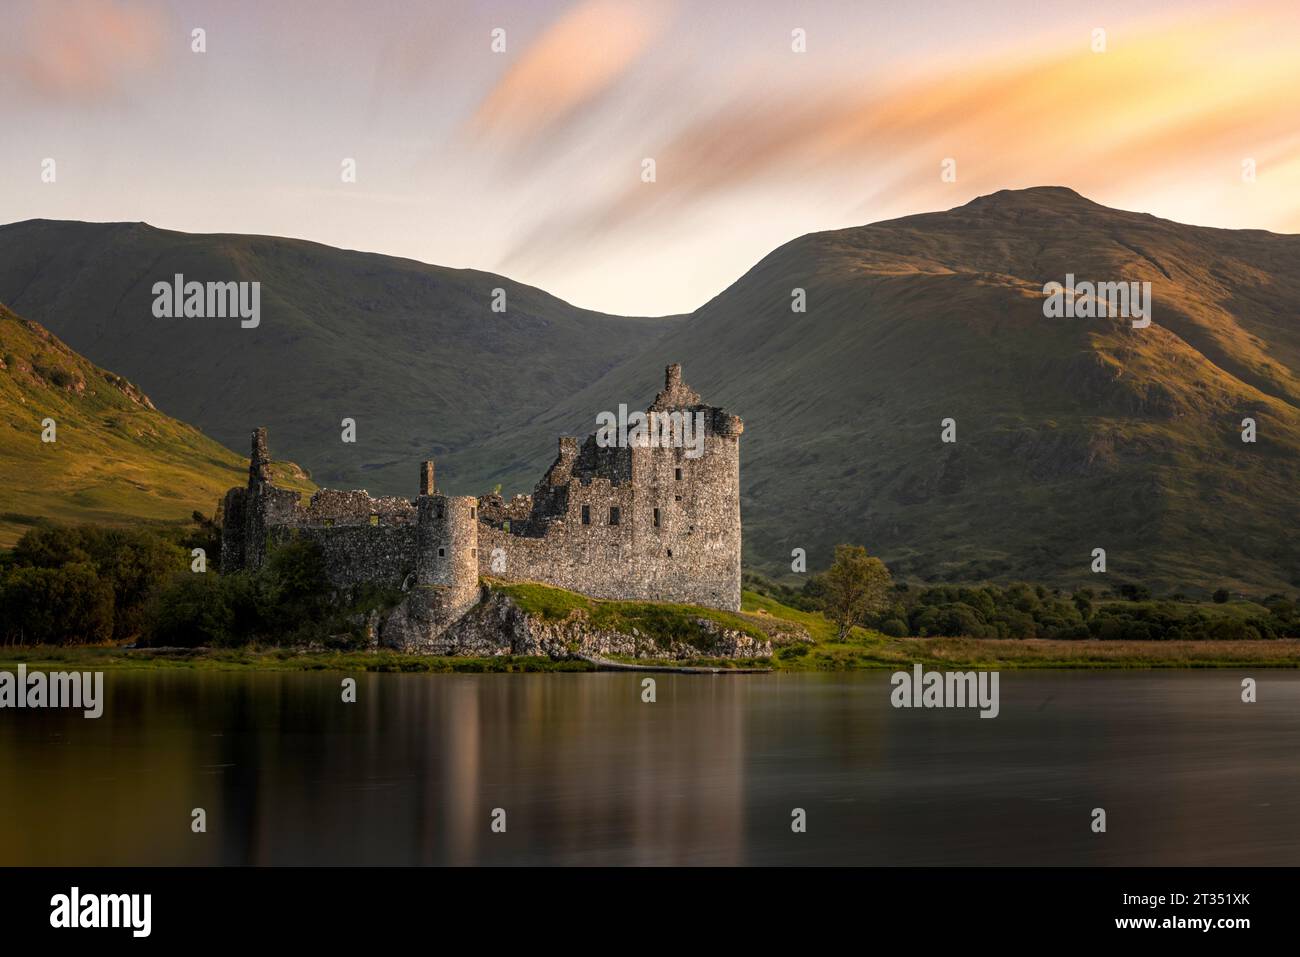 Kilchurn Castle is located on a small island in Loch Awe, Scottish Highlands. Stock Photo